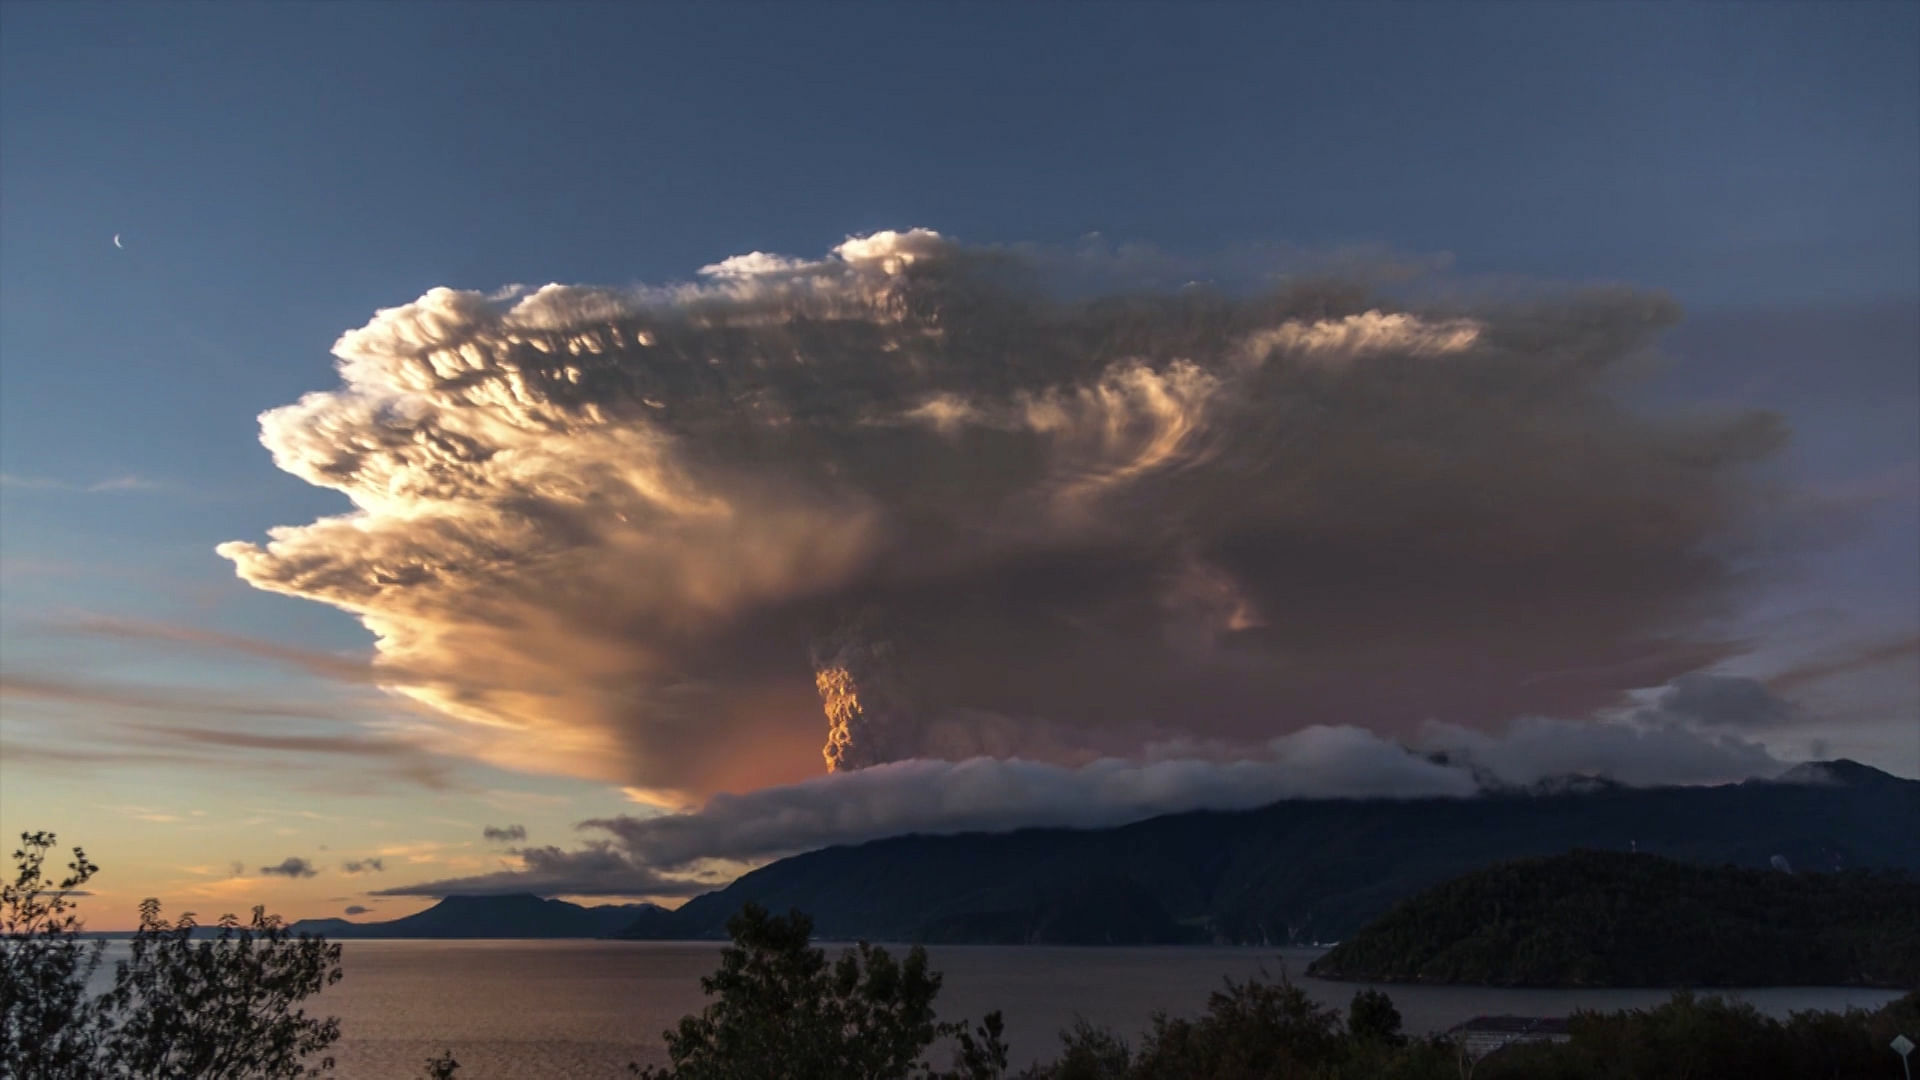 Stunning timelapse shows a volcanic eruption as you’ve never seen it before.